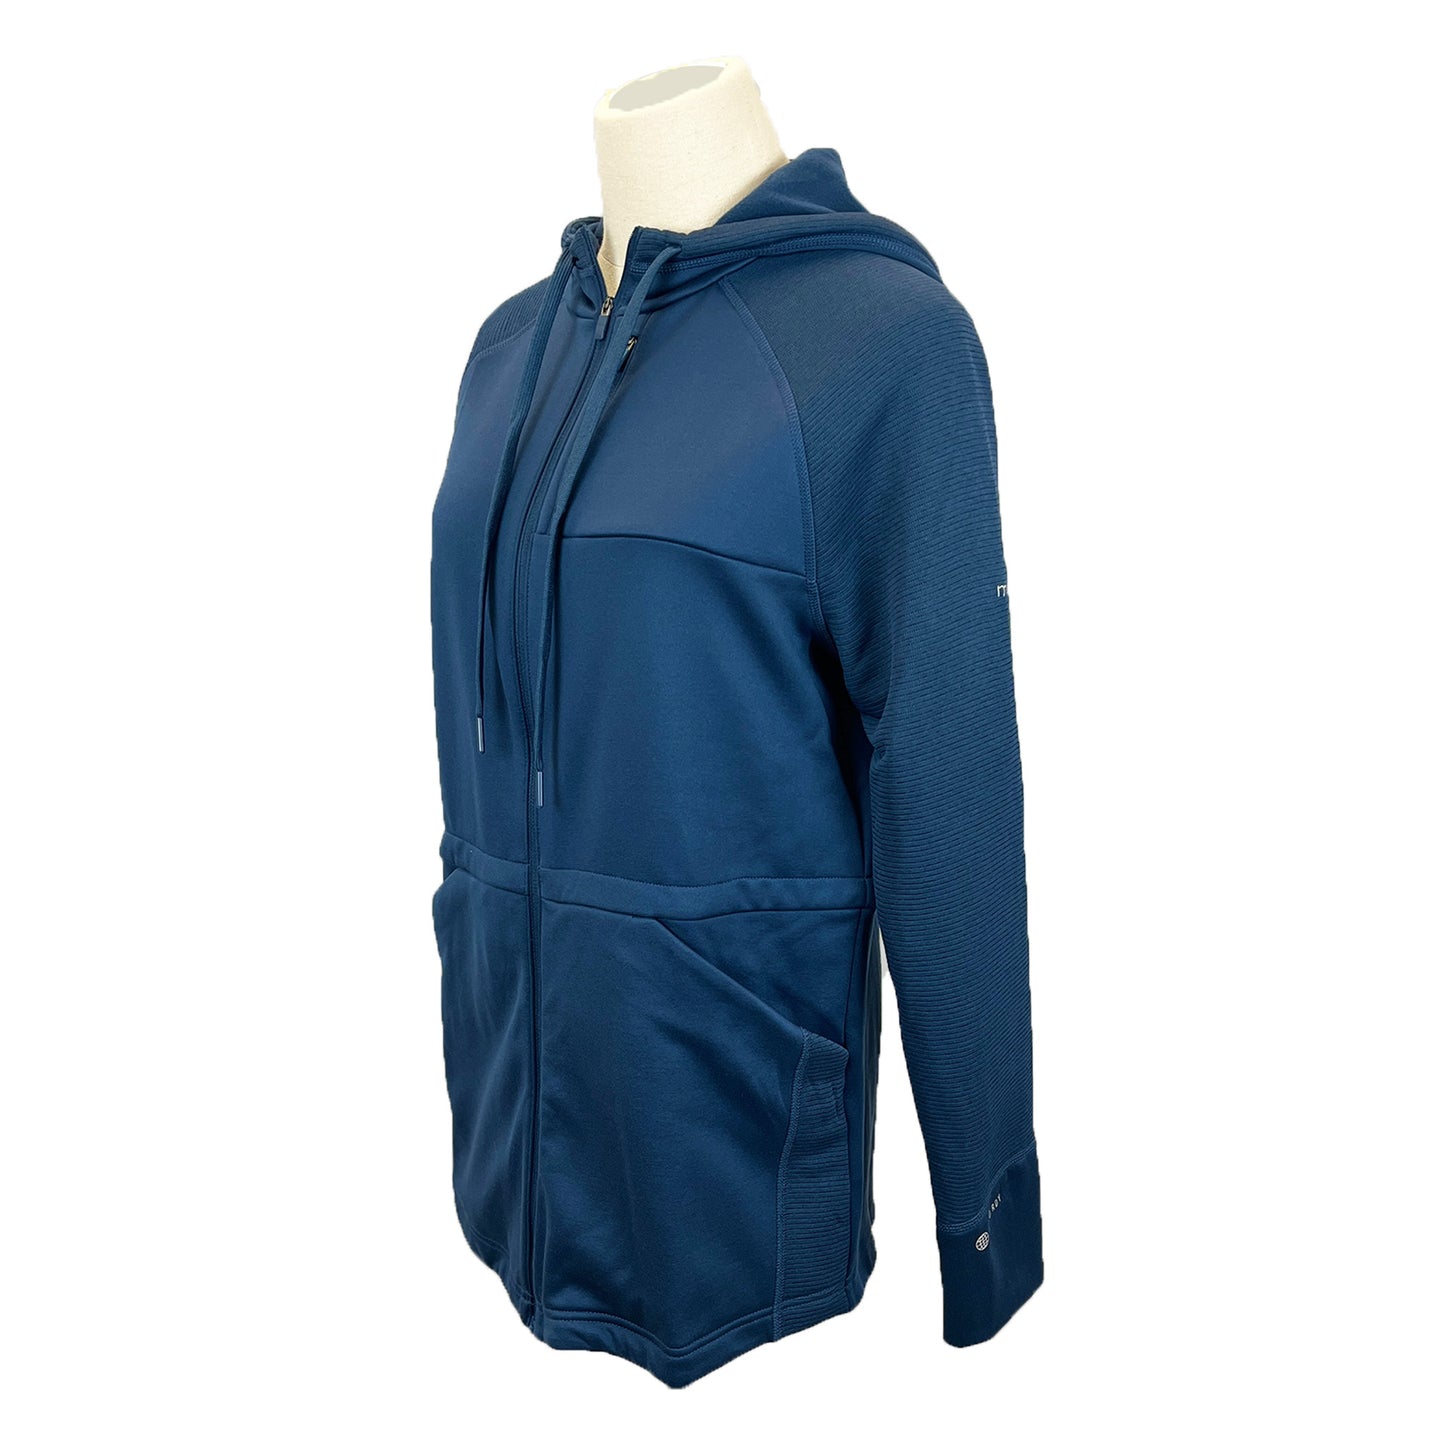 Adidas Women's Cold Rdy. Full Zip Parka